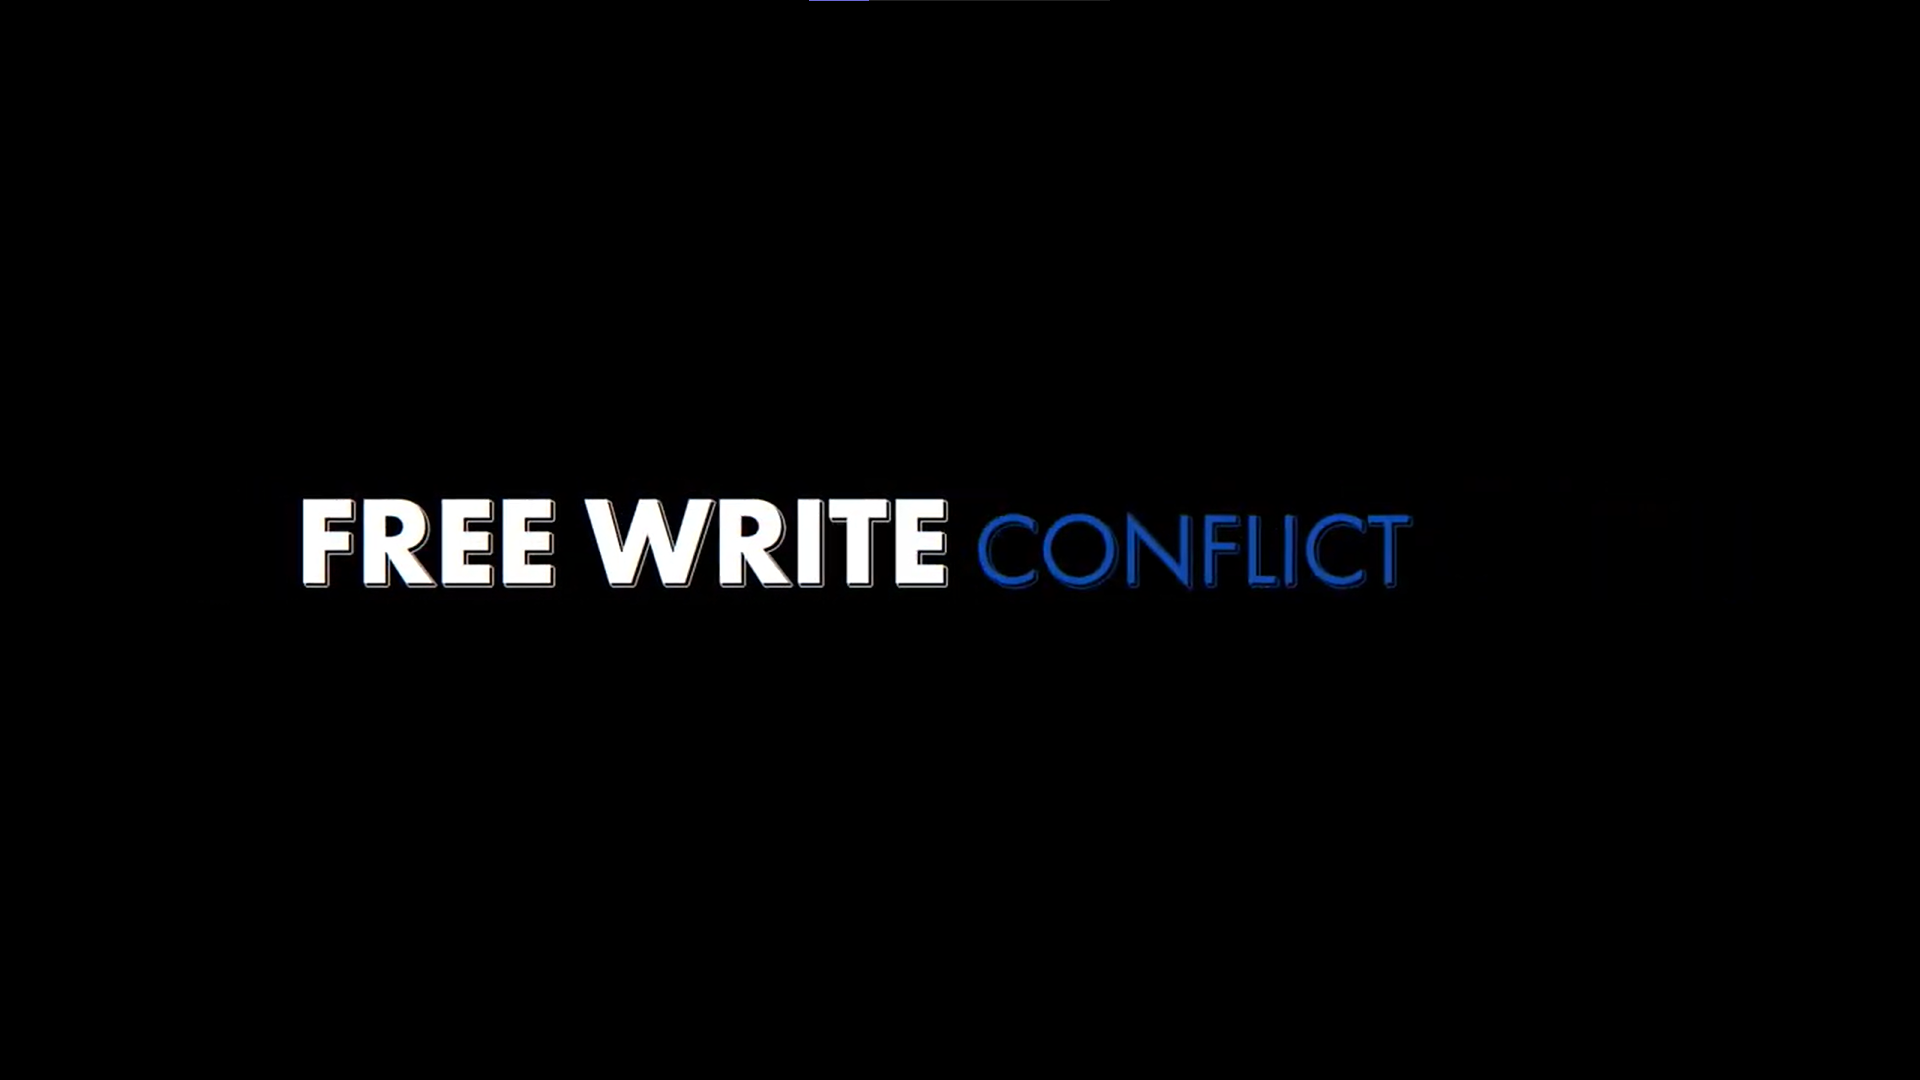 "Conflict" Free Write Title Card